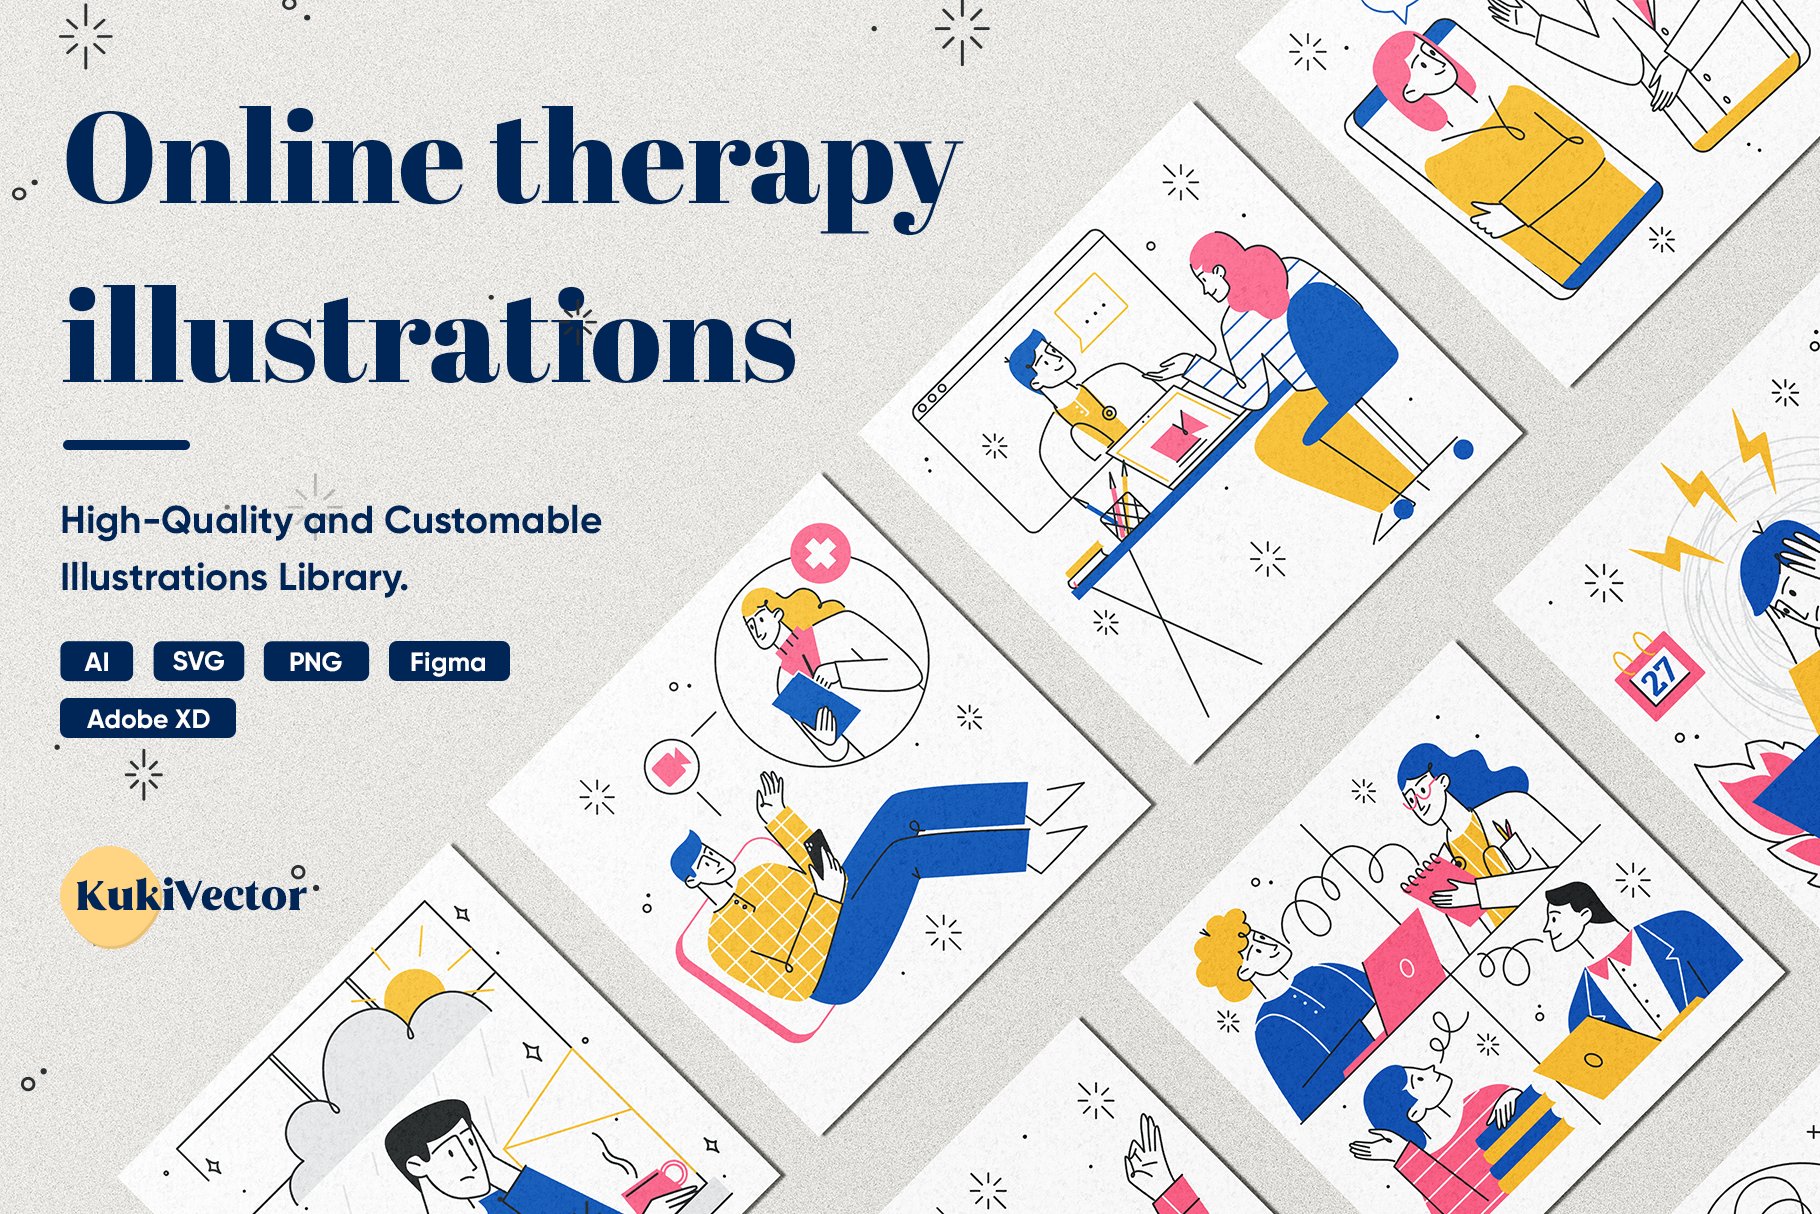 Online therapy illustrations cover image.